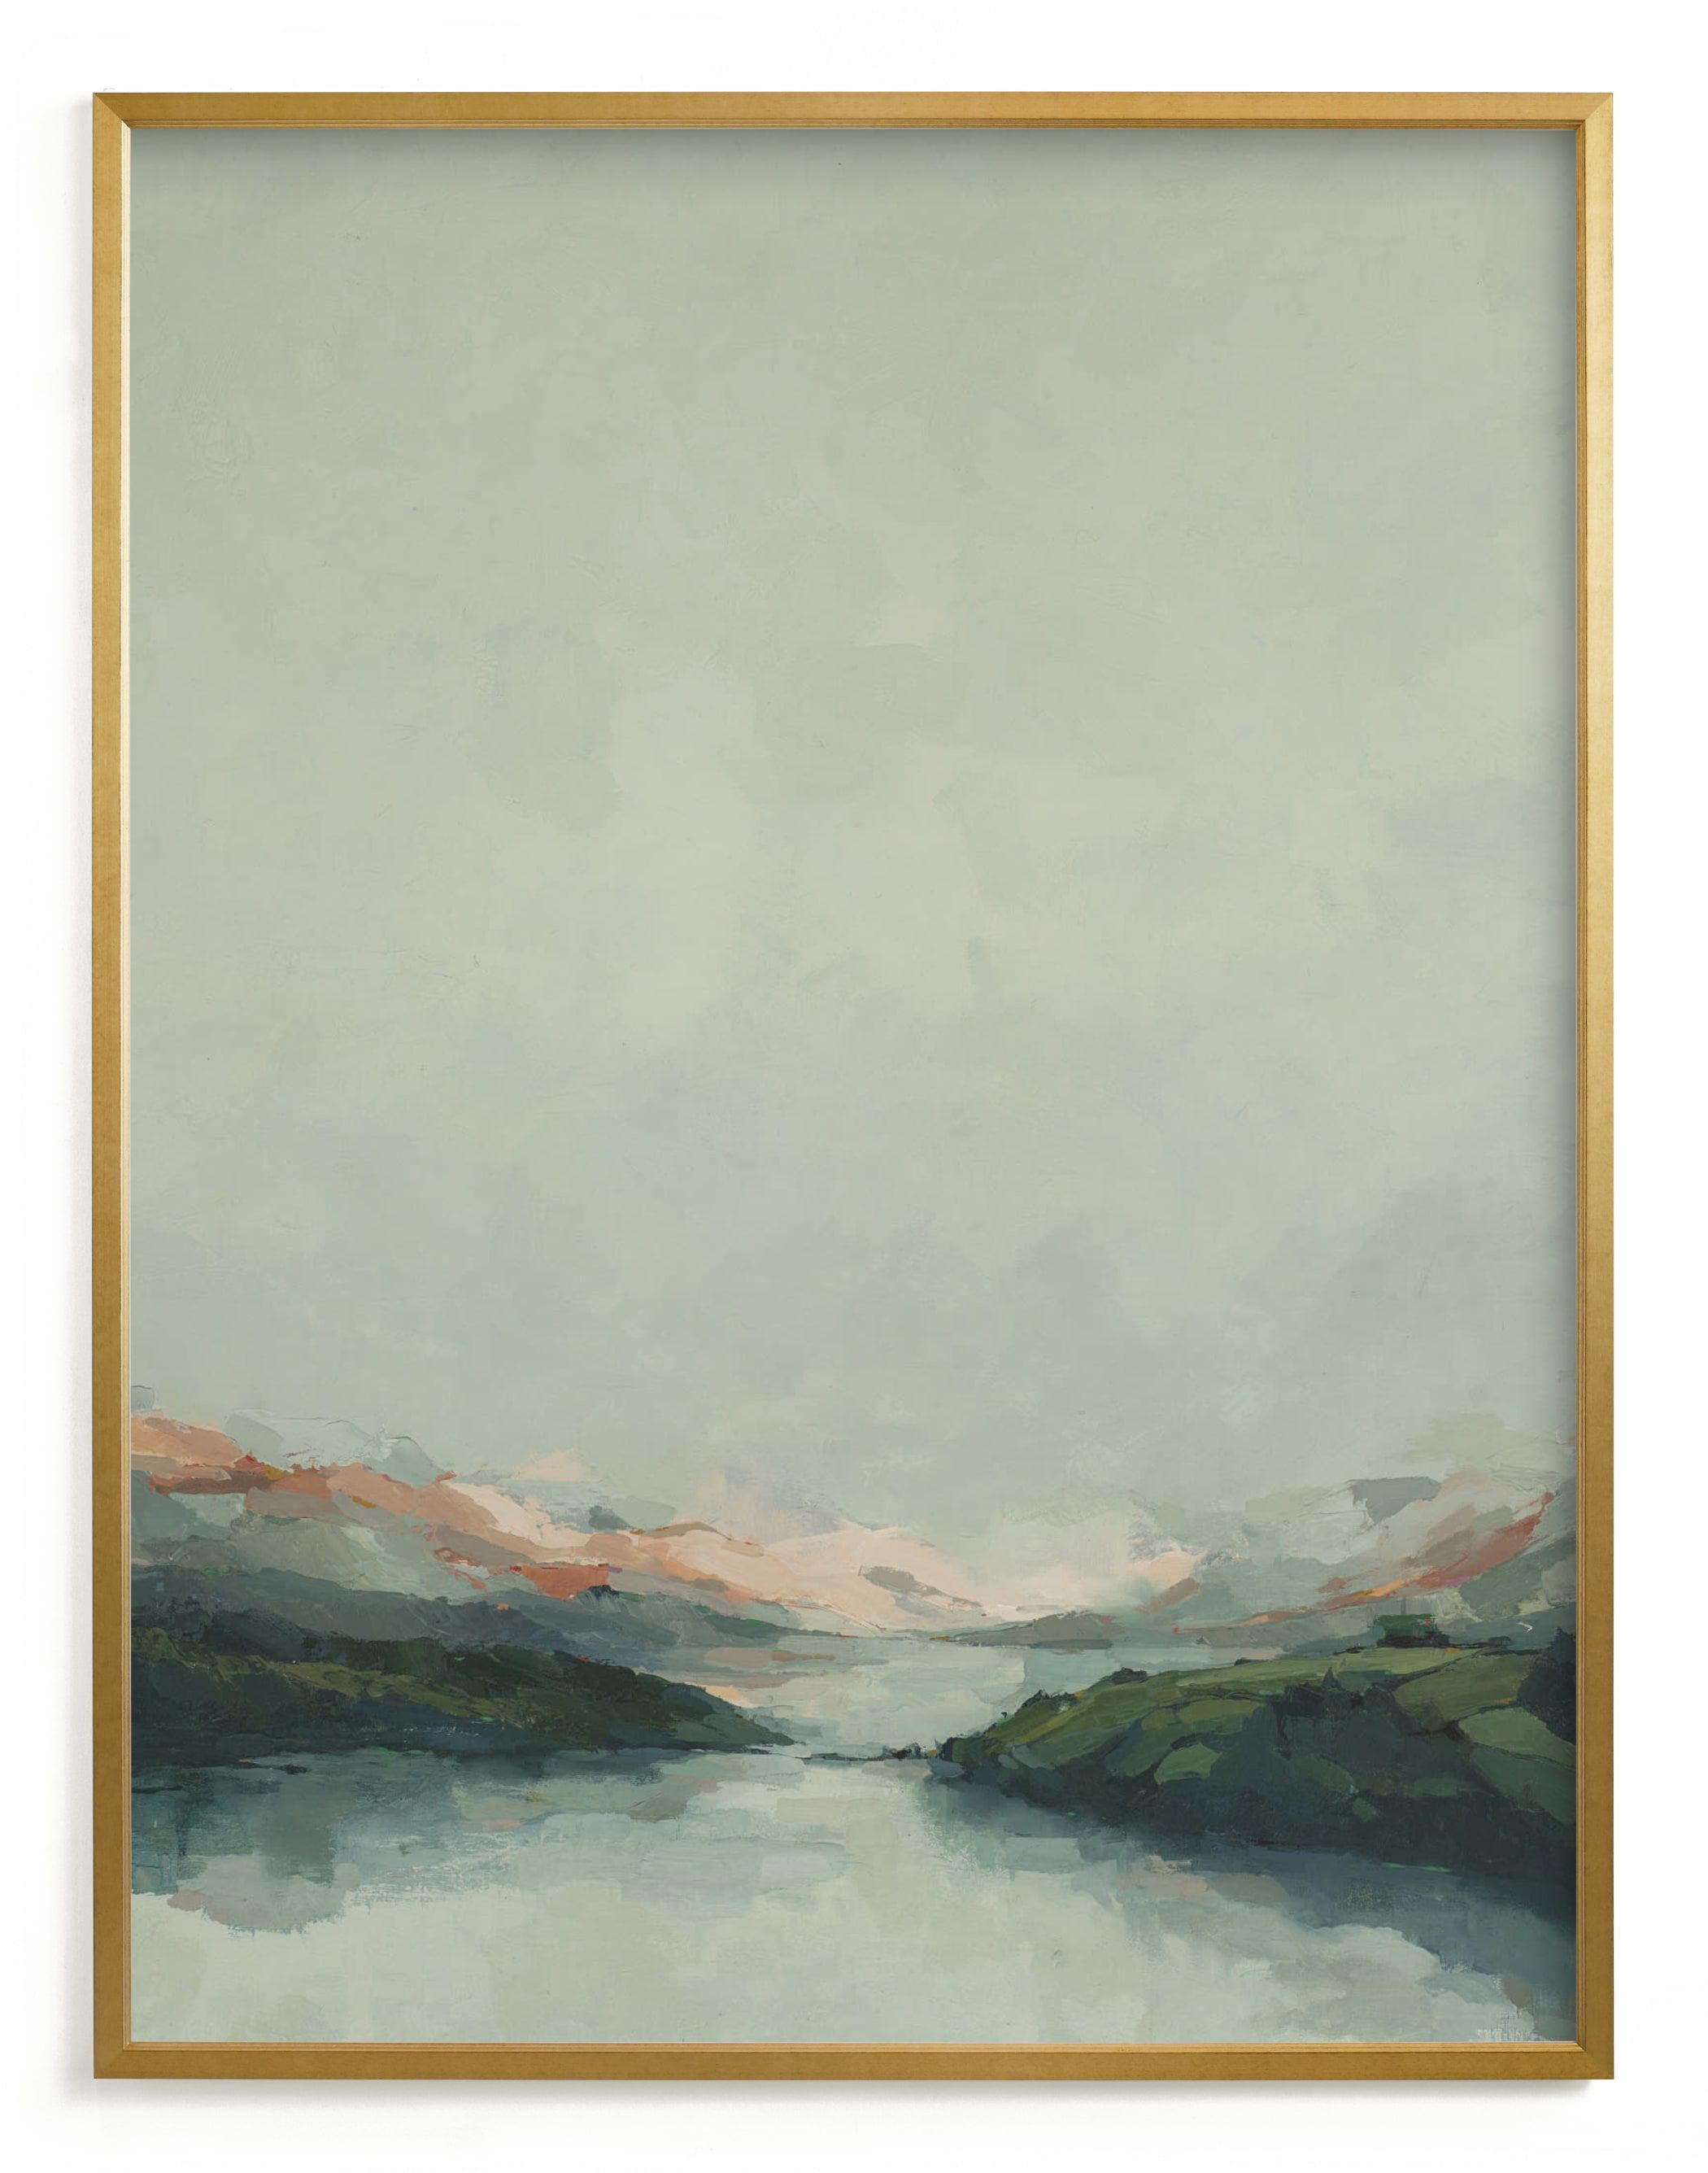 "Waterton Glacier" - Painting Limited Edition Art Print by Wendy Keller. | Minted